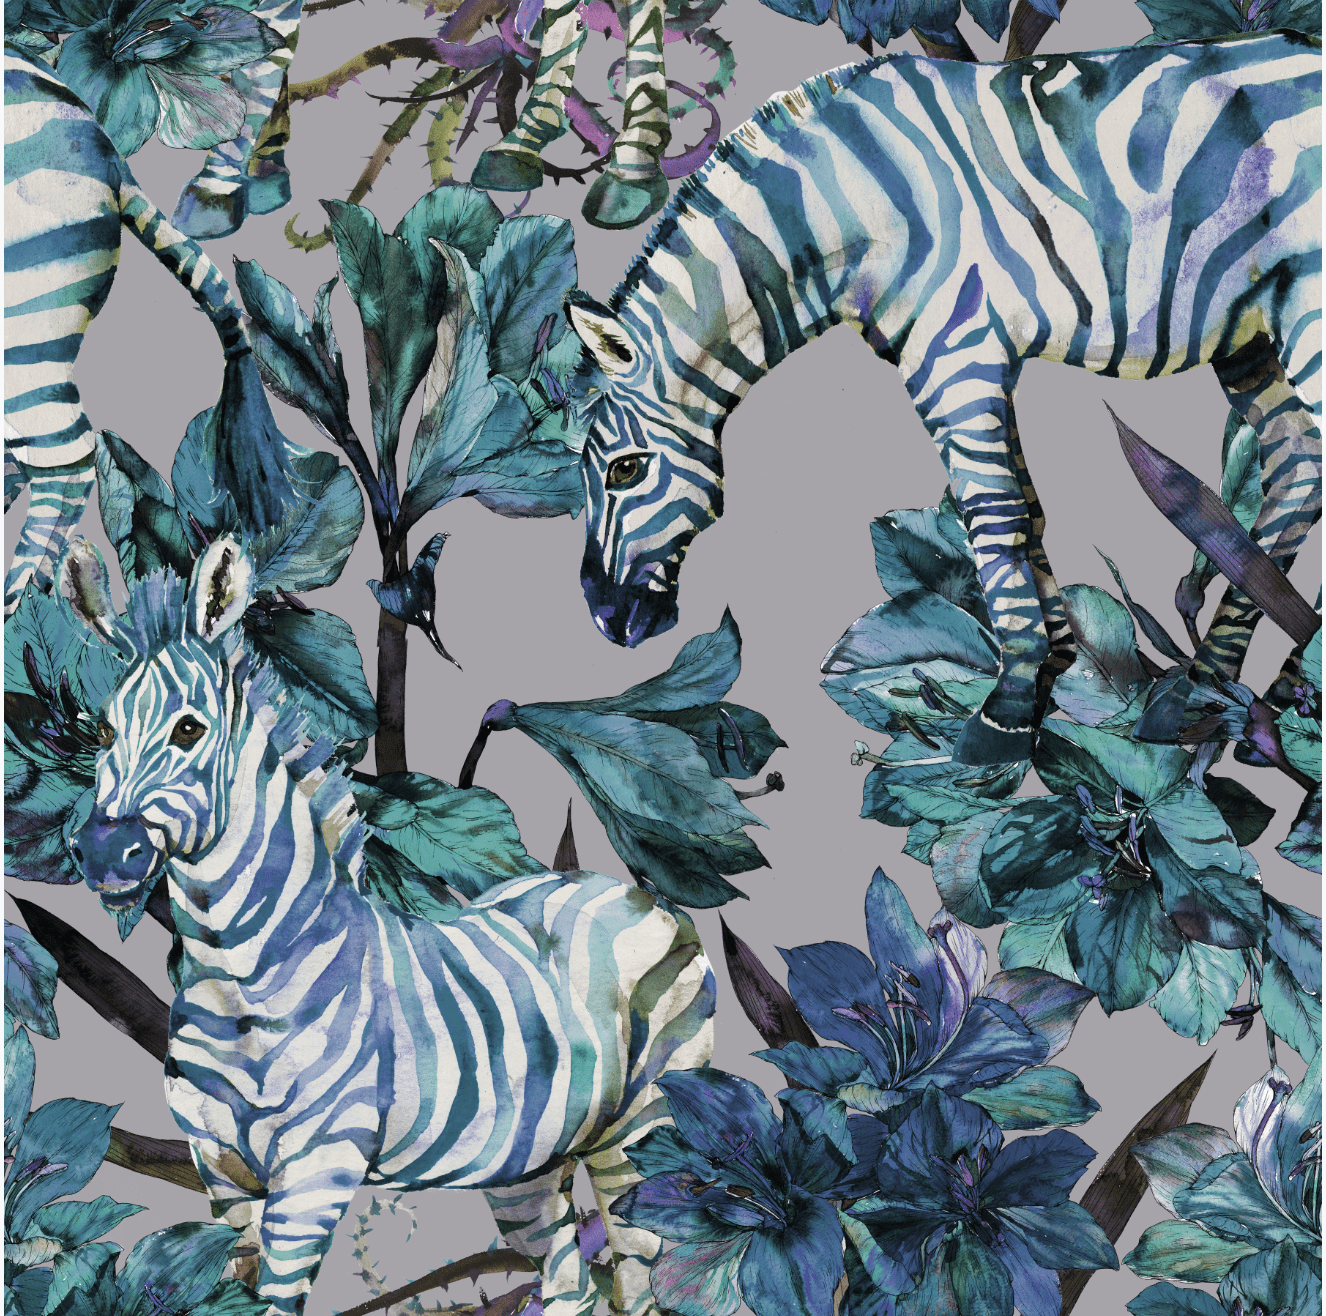 Meet Moxie. She’s bold, adventurous and part of our new take on animal prints. Our newest line of fabrics, wallpaper and trim come in a debut color way of lavender and teal and feature a large-scale watercolor zebra, named Moxie, of course. 